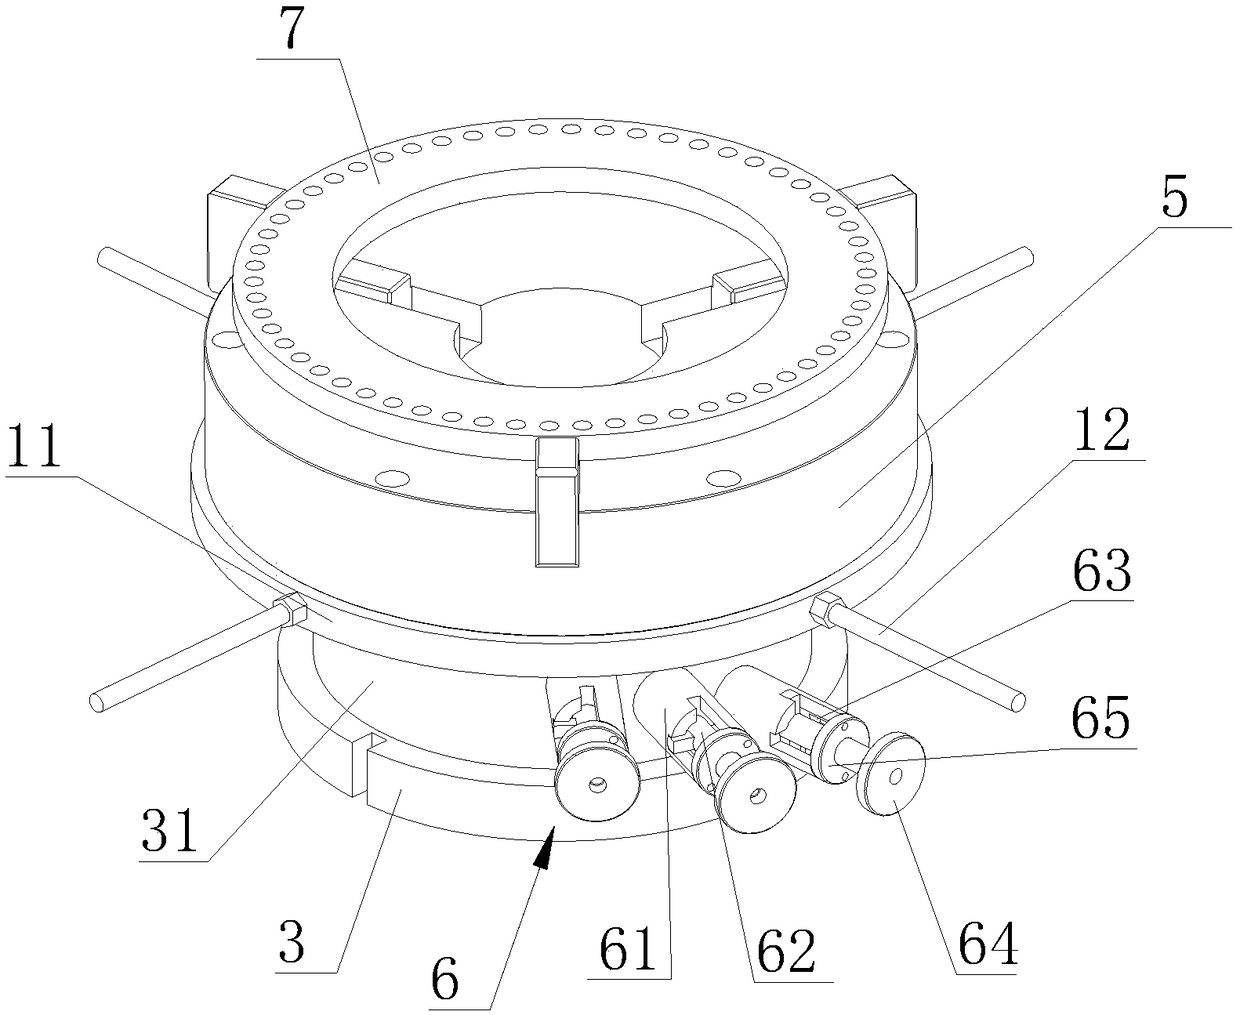 Motor outer end ring damping rod connecting hole drilling tool and application method